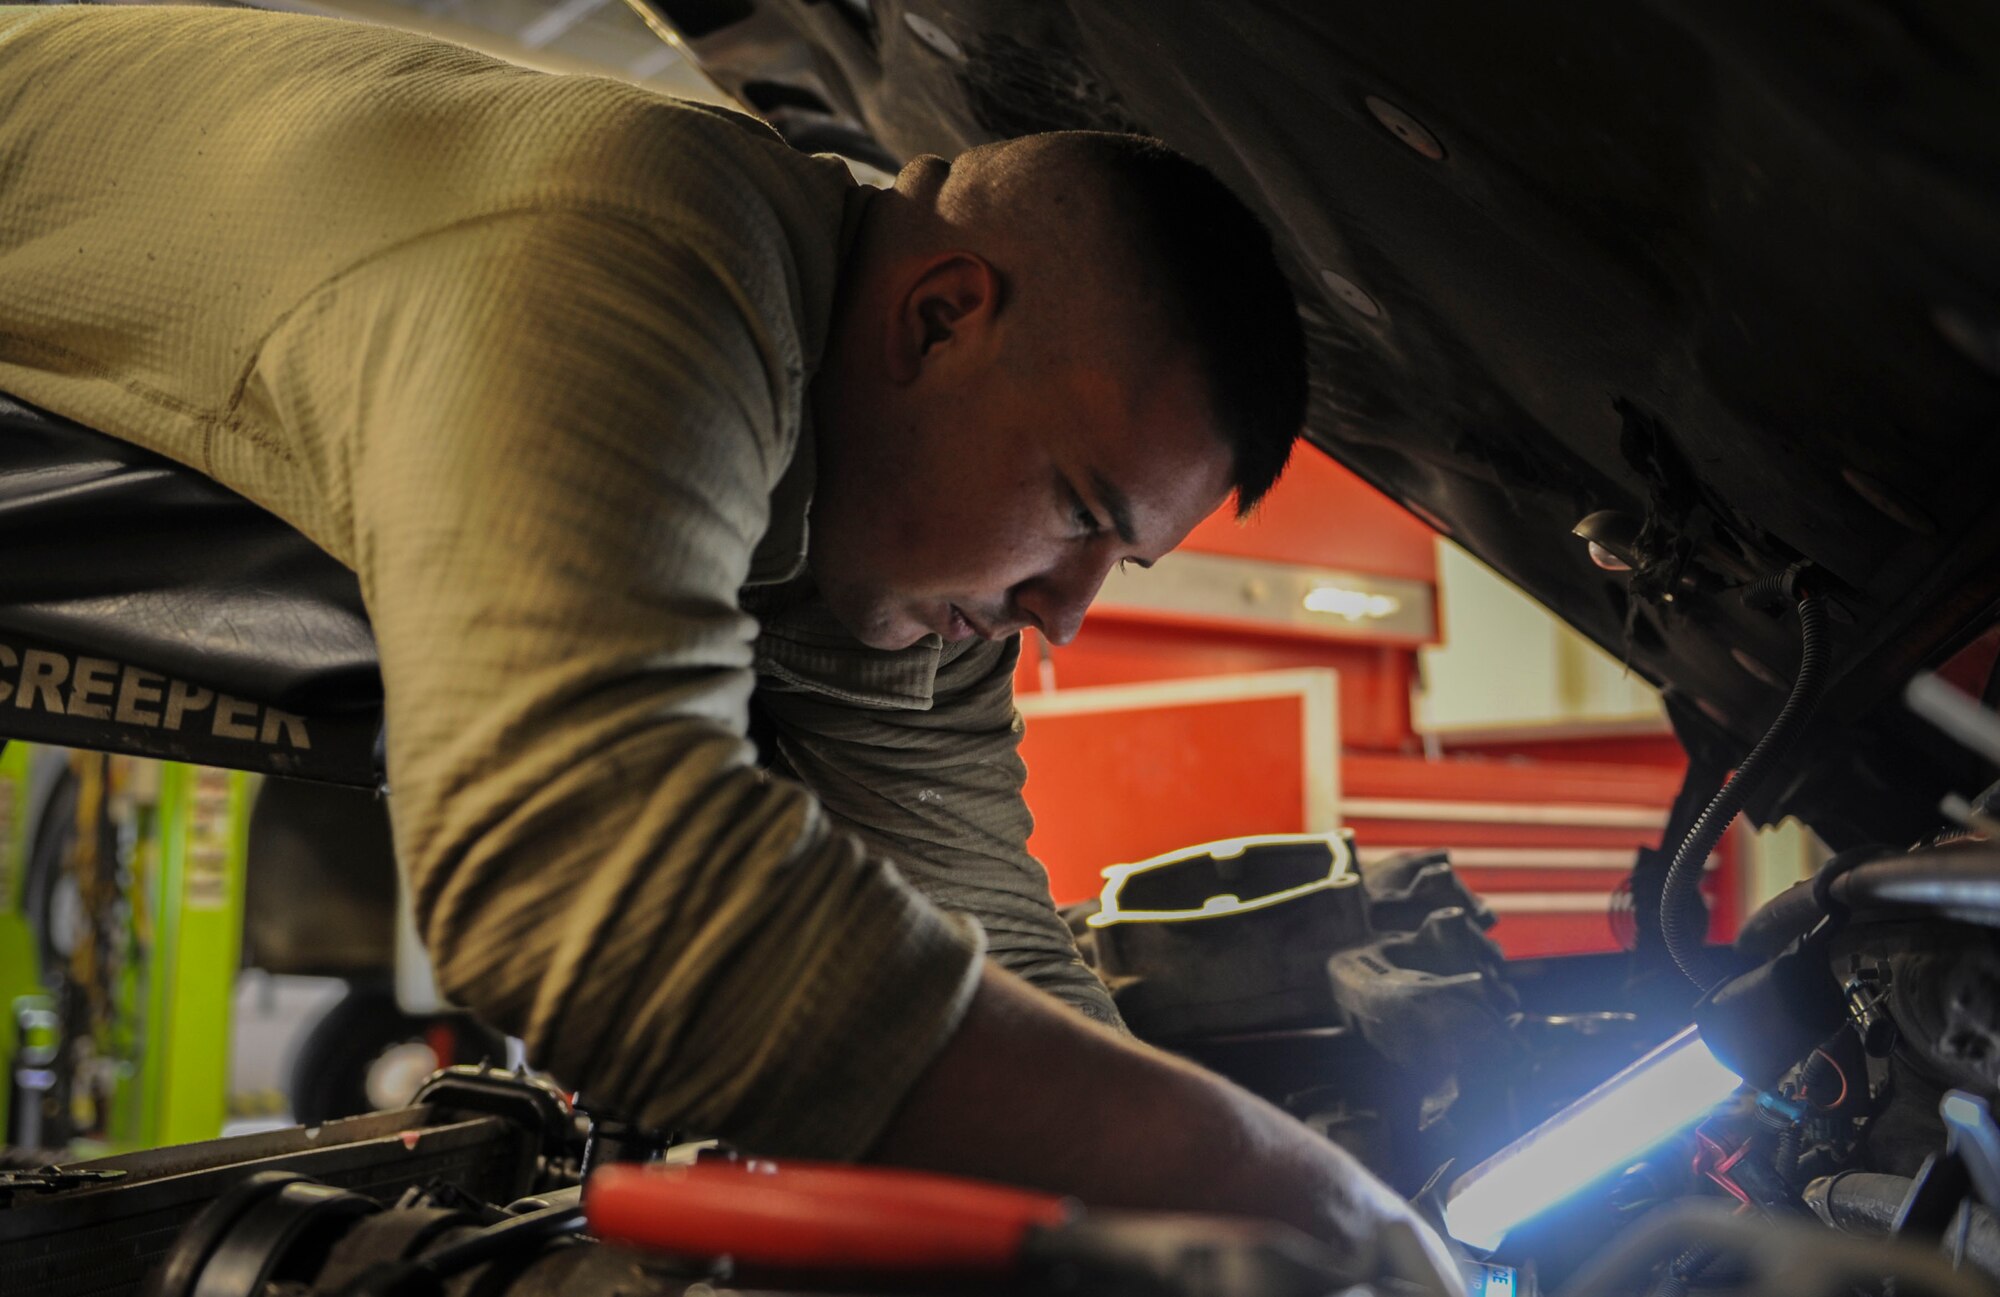 U. S. Air Force Senior Airman Josh Flodder, 23d Logistics Readiness Squadron vehicle vehicular equipment maintenance journeyman, works on a truck engine at Moody Air Force Base, Ga., March 5, 2014. Flodder used a topside creeper allowing him to reach the part he needed to fix. (U.S. Air Force photo by Airman 1st Class Alexis Millican/Released)